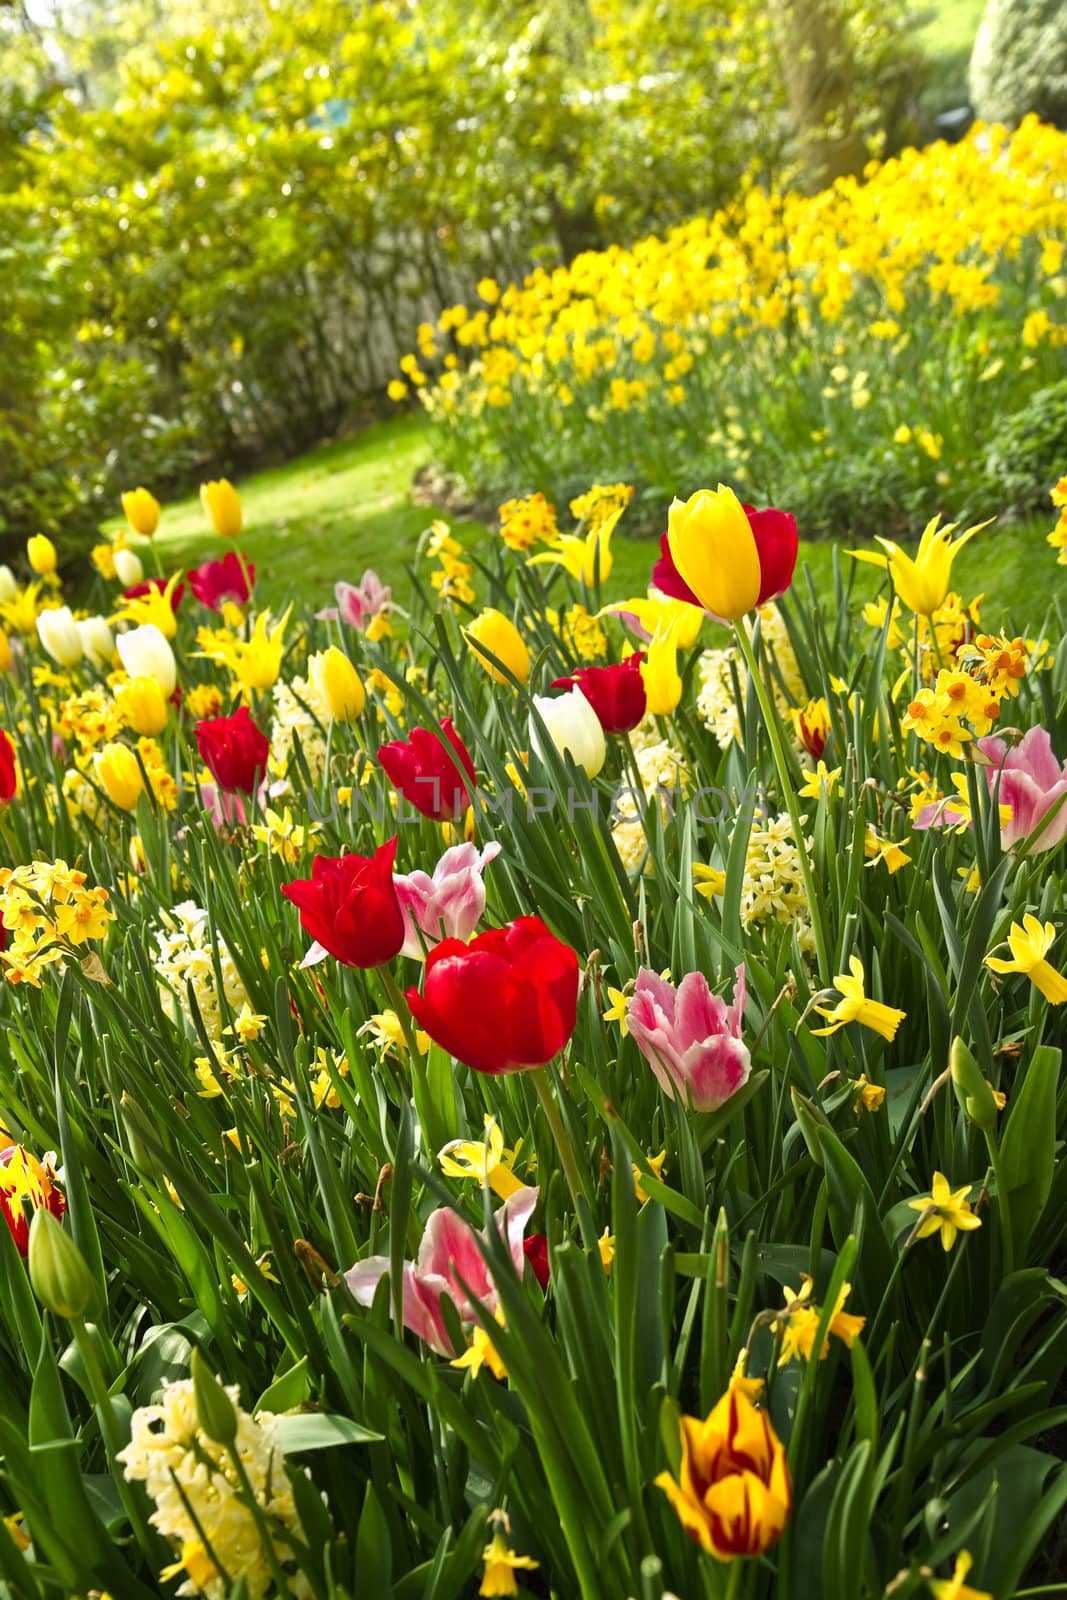 Tulips and daffodils in lots of colors in spring  by Colette